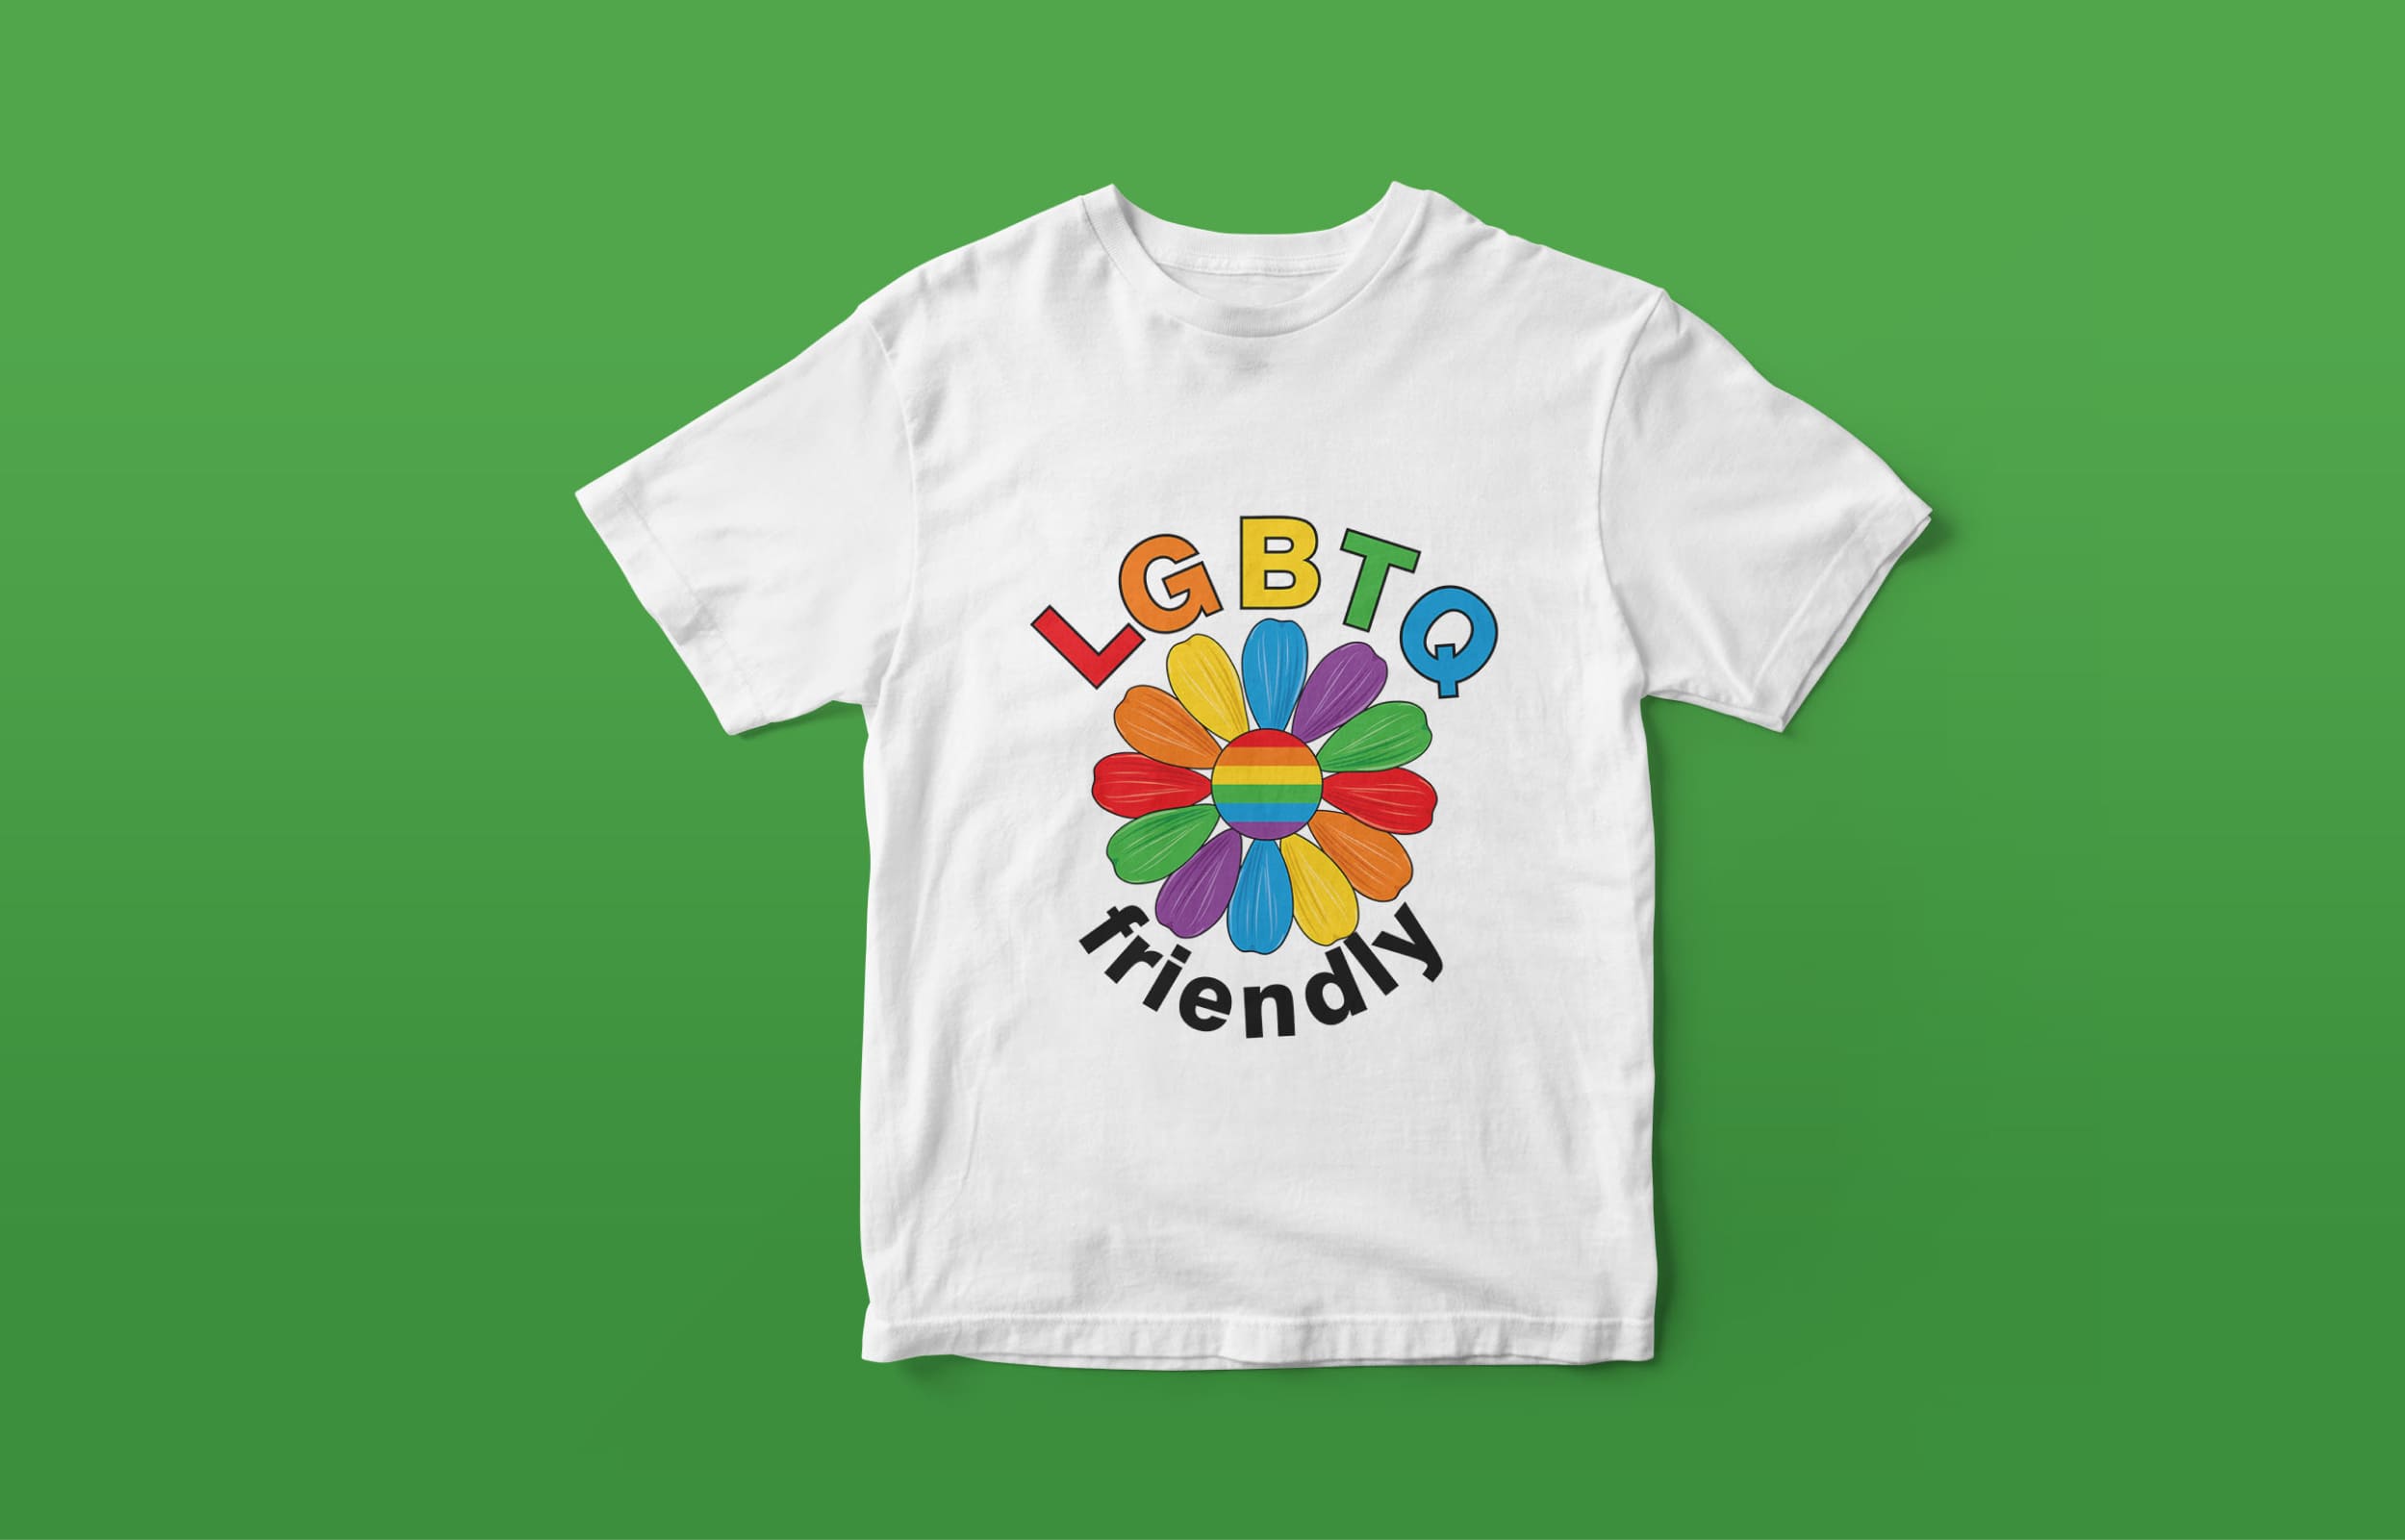 White t-shirt with "LGBTQ" lettering in LGBT colors and black "friendly" lettering and a flower in LGBT colors on a green background.